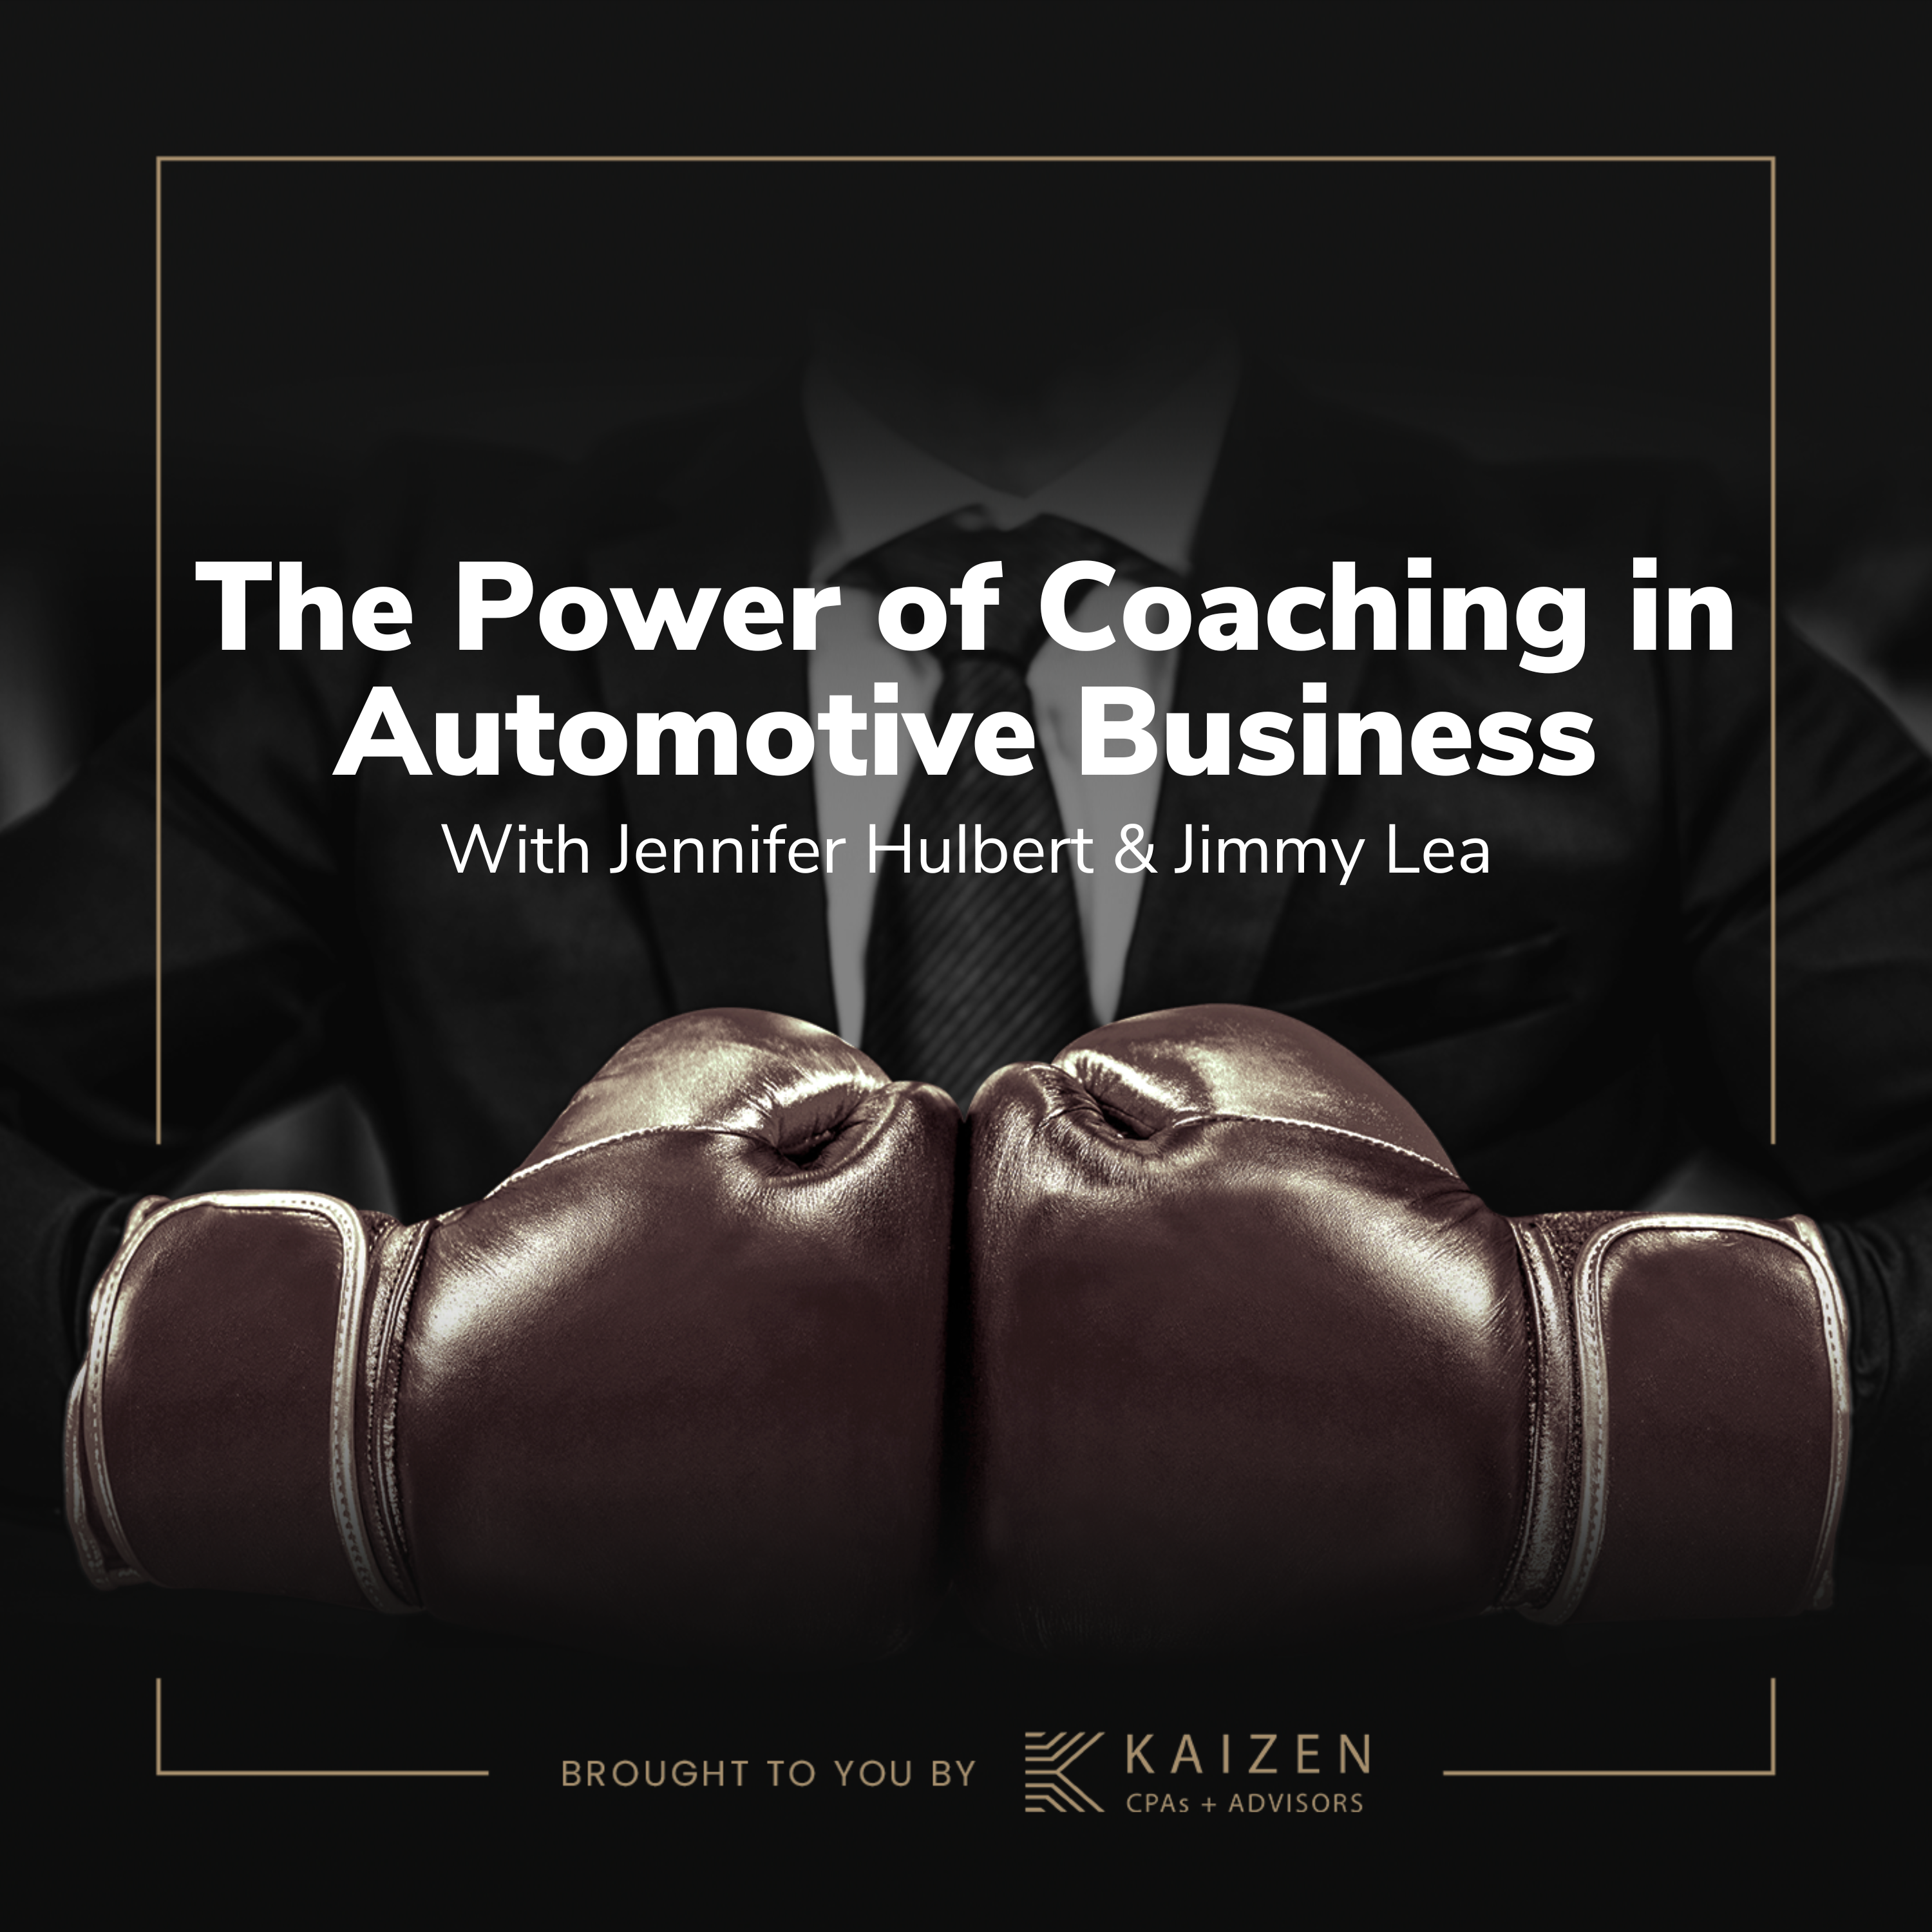 The Power of Coaching in Automotive Business